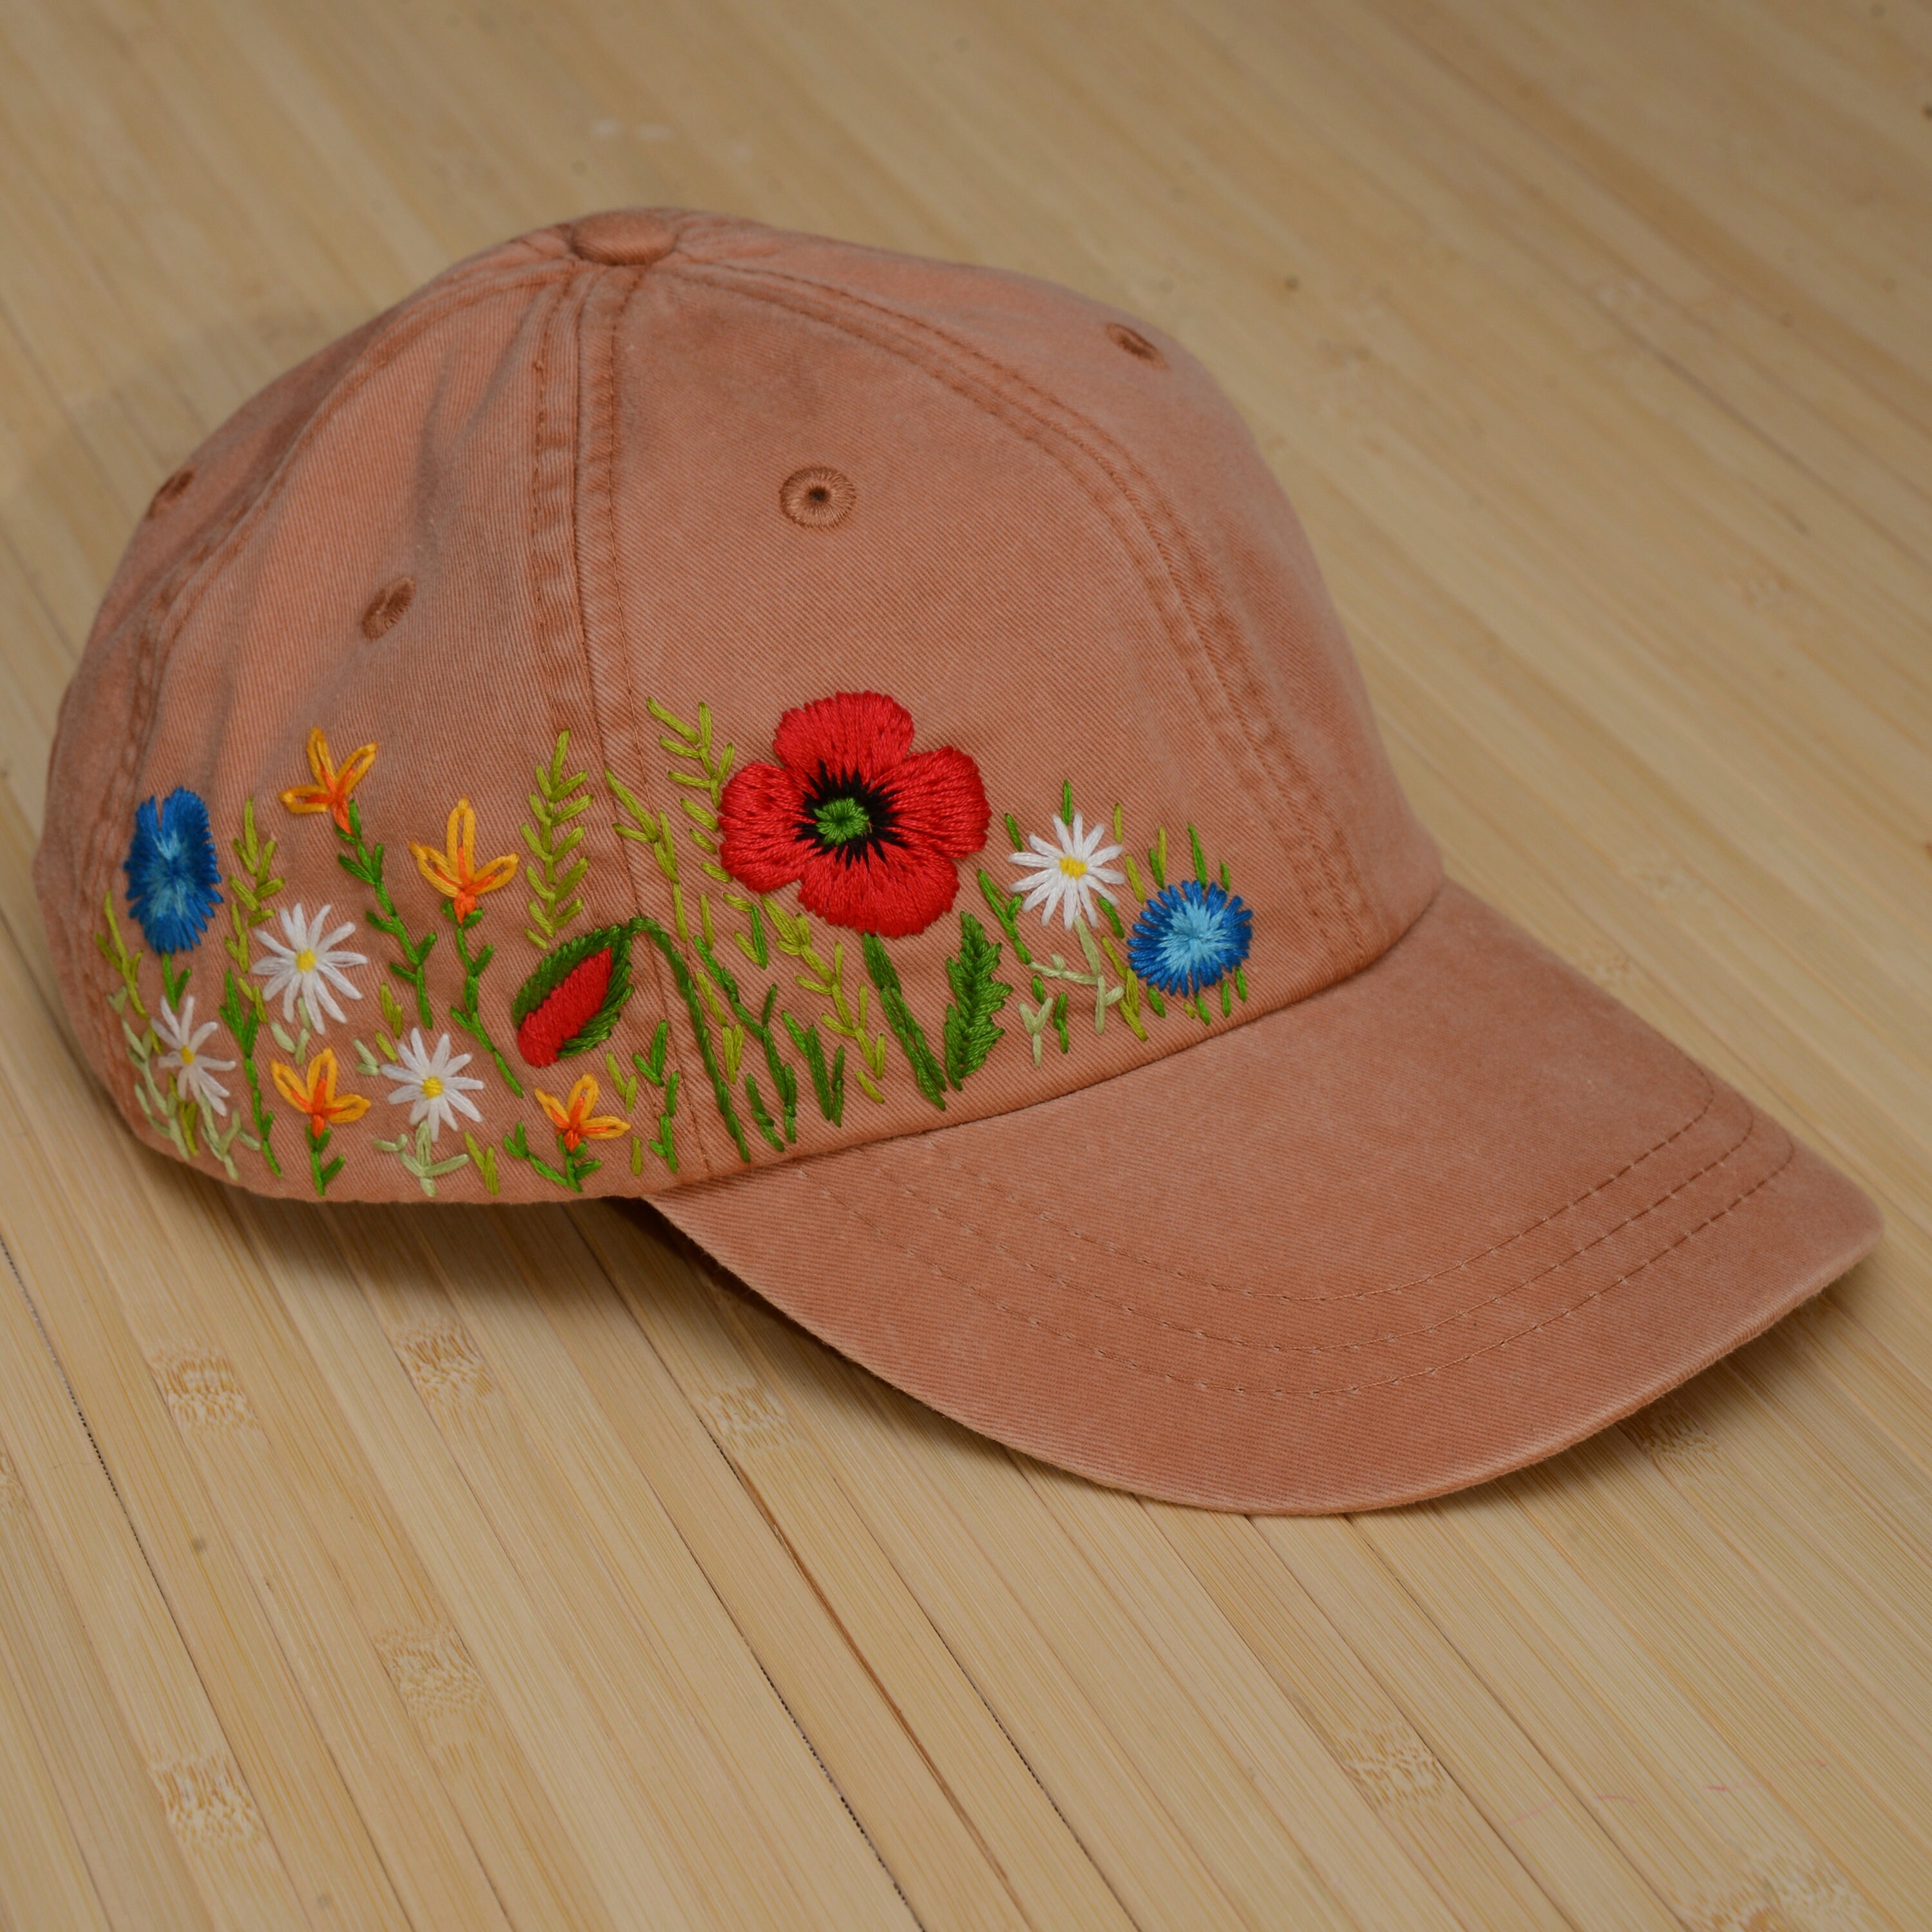 Hand embroidered flower cap terra-cotta wildflowers hat for | Etsy